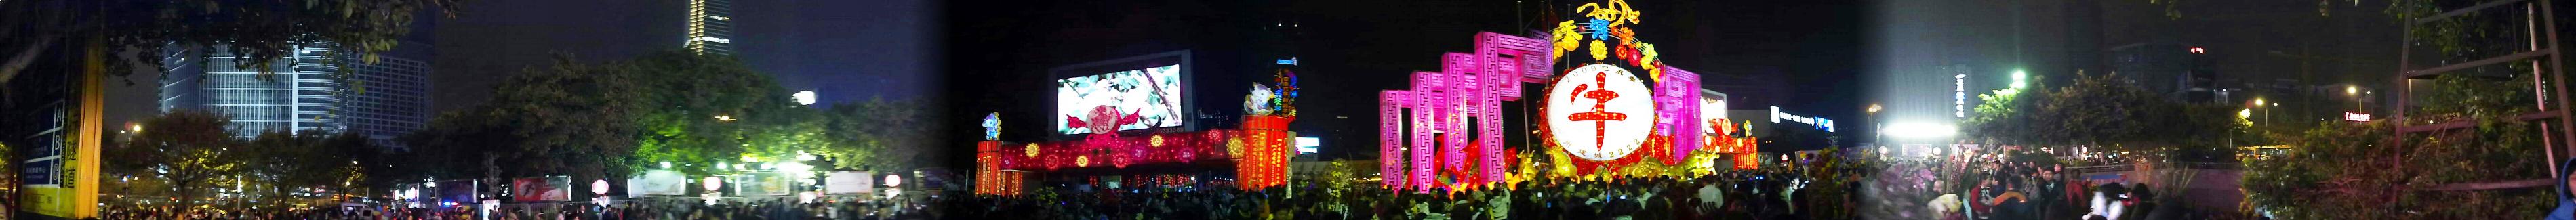 The main entrance of the Tianhe Flower Market (panorama), the big character is "Ox"